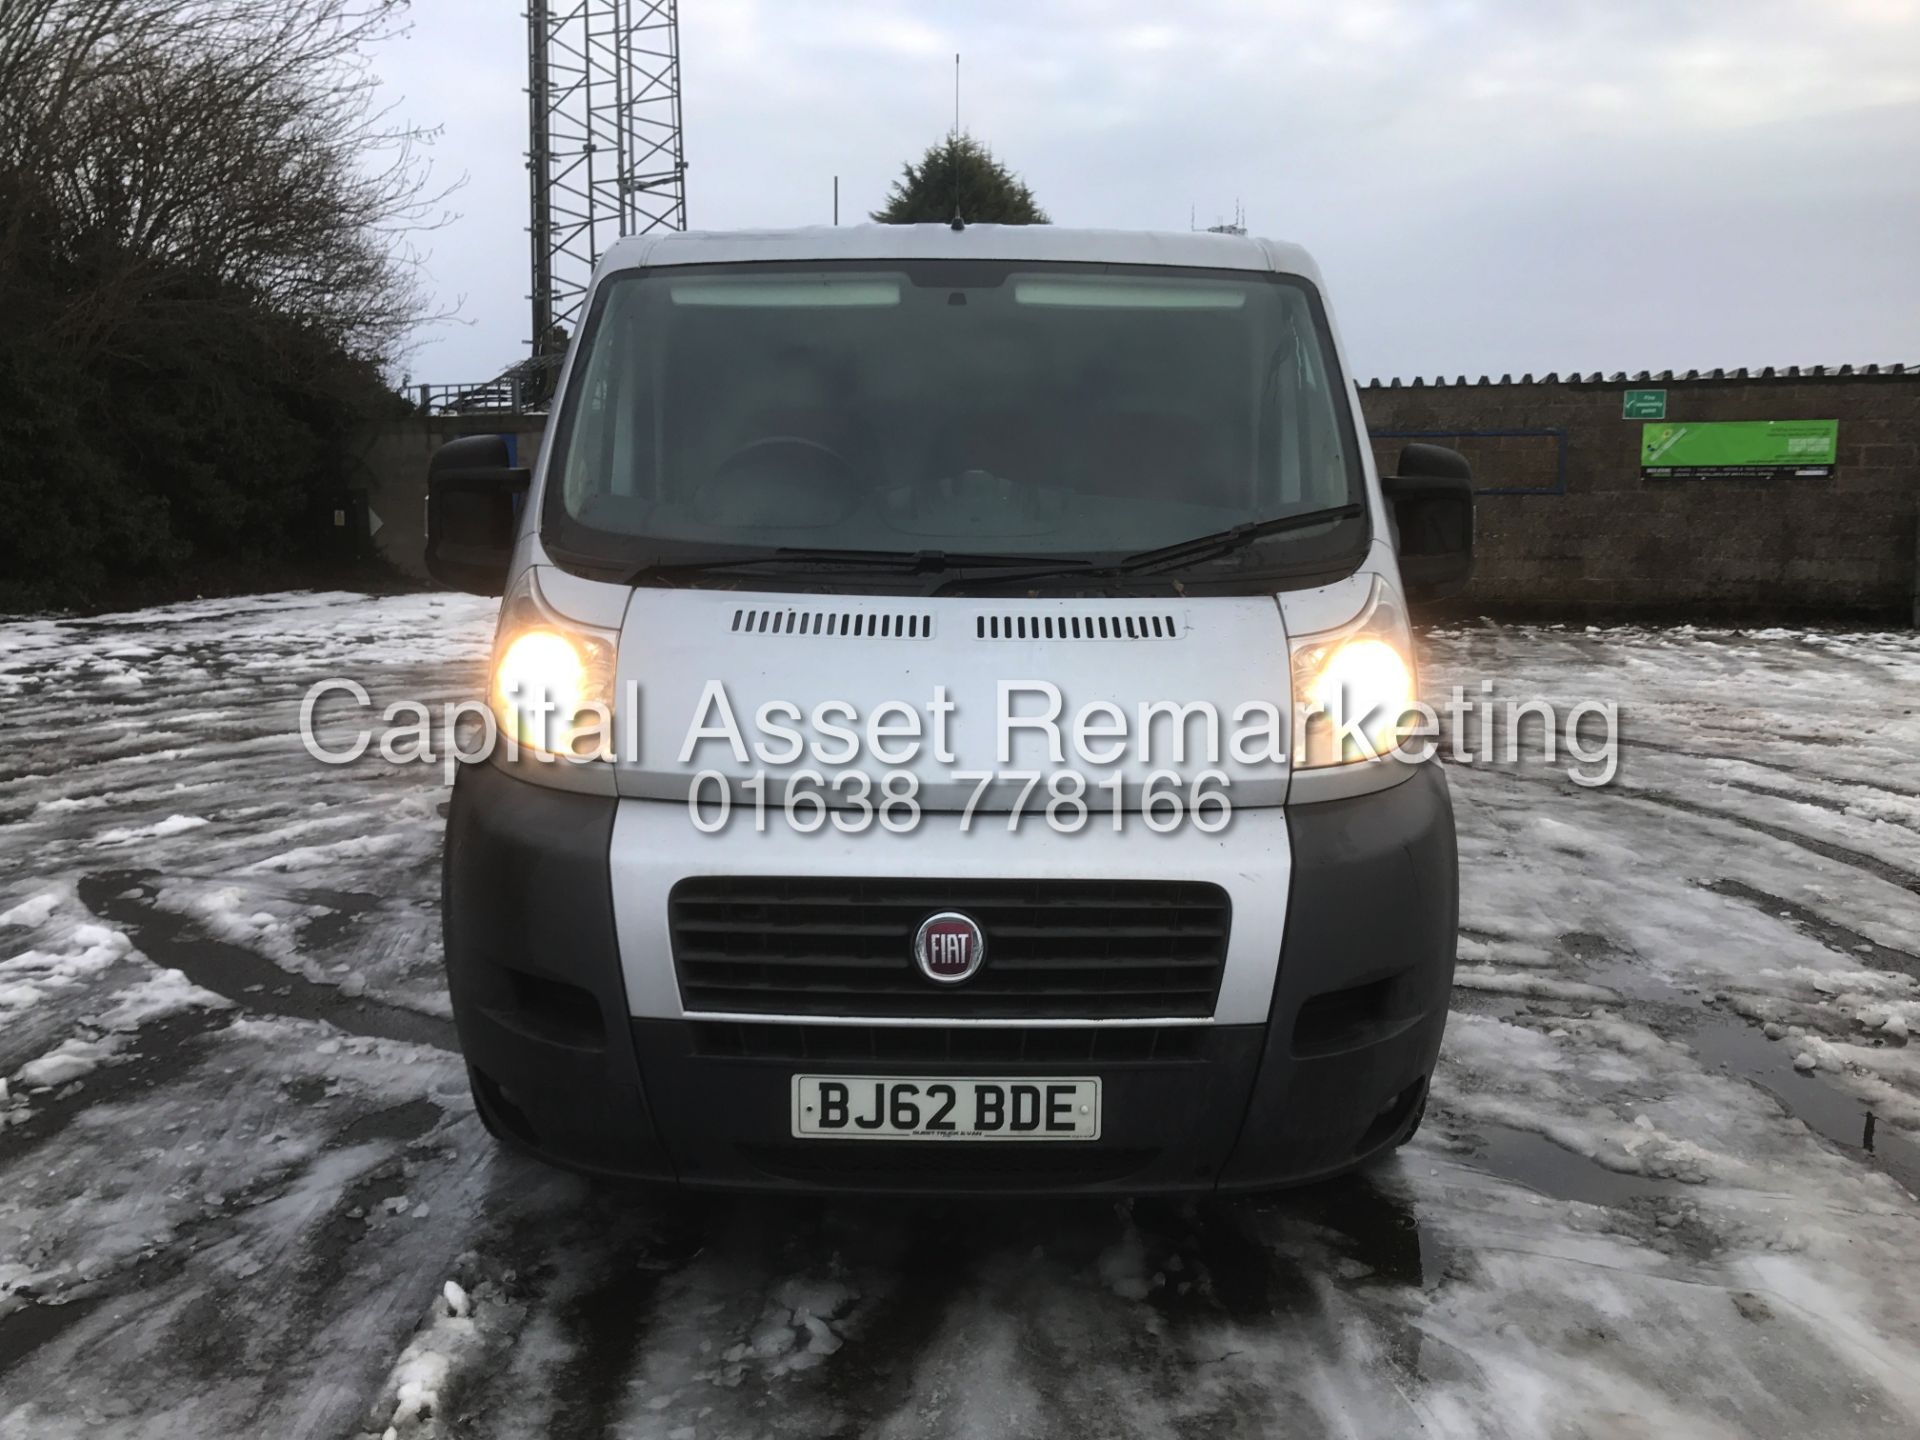 On Sale FIAT DUCATO 2.3 MULTIJET "130BHP 6 SPEED"(2013 MODEL - NEW SHAPE) 1 OWNER-AIR CON-ELEC PACK - Image 3 of 14